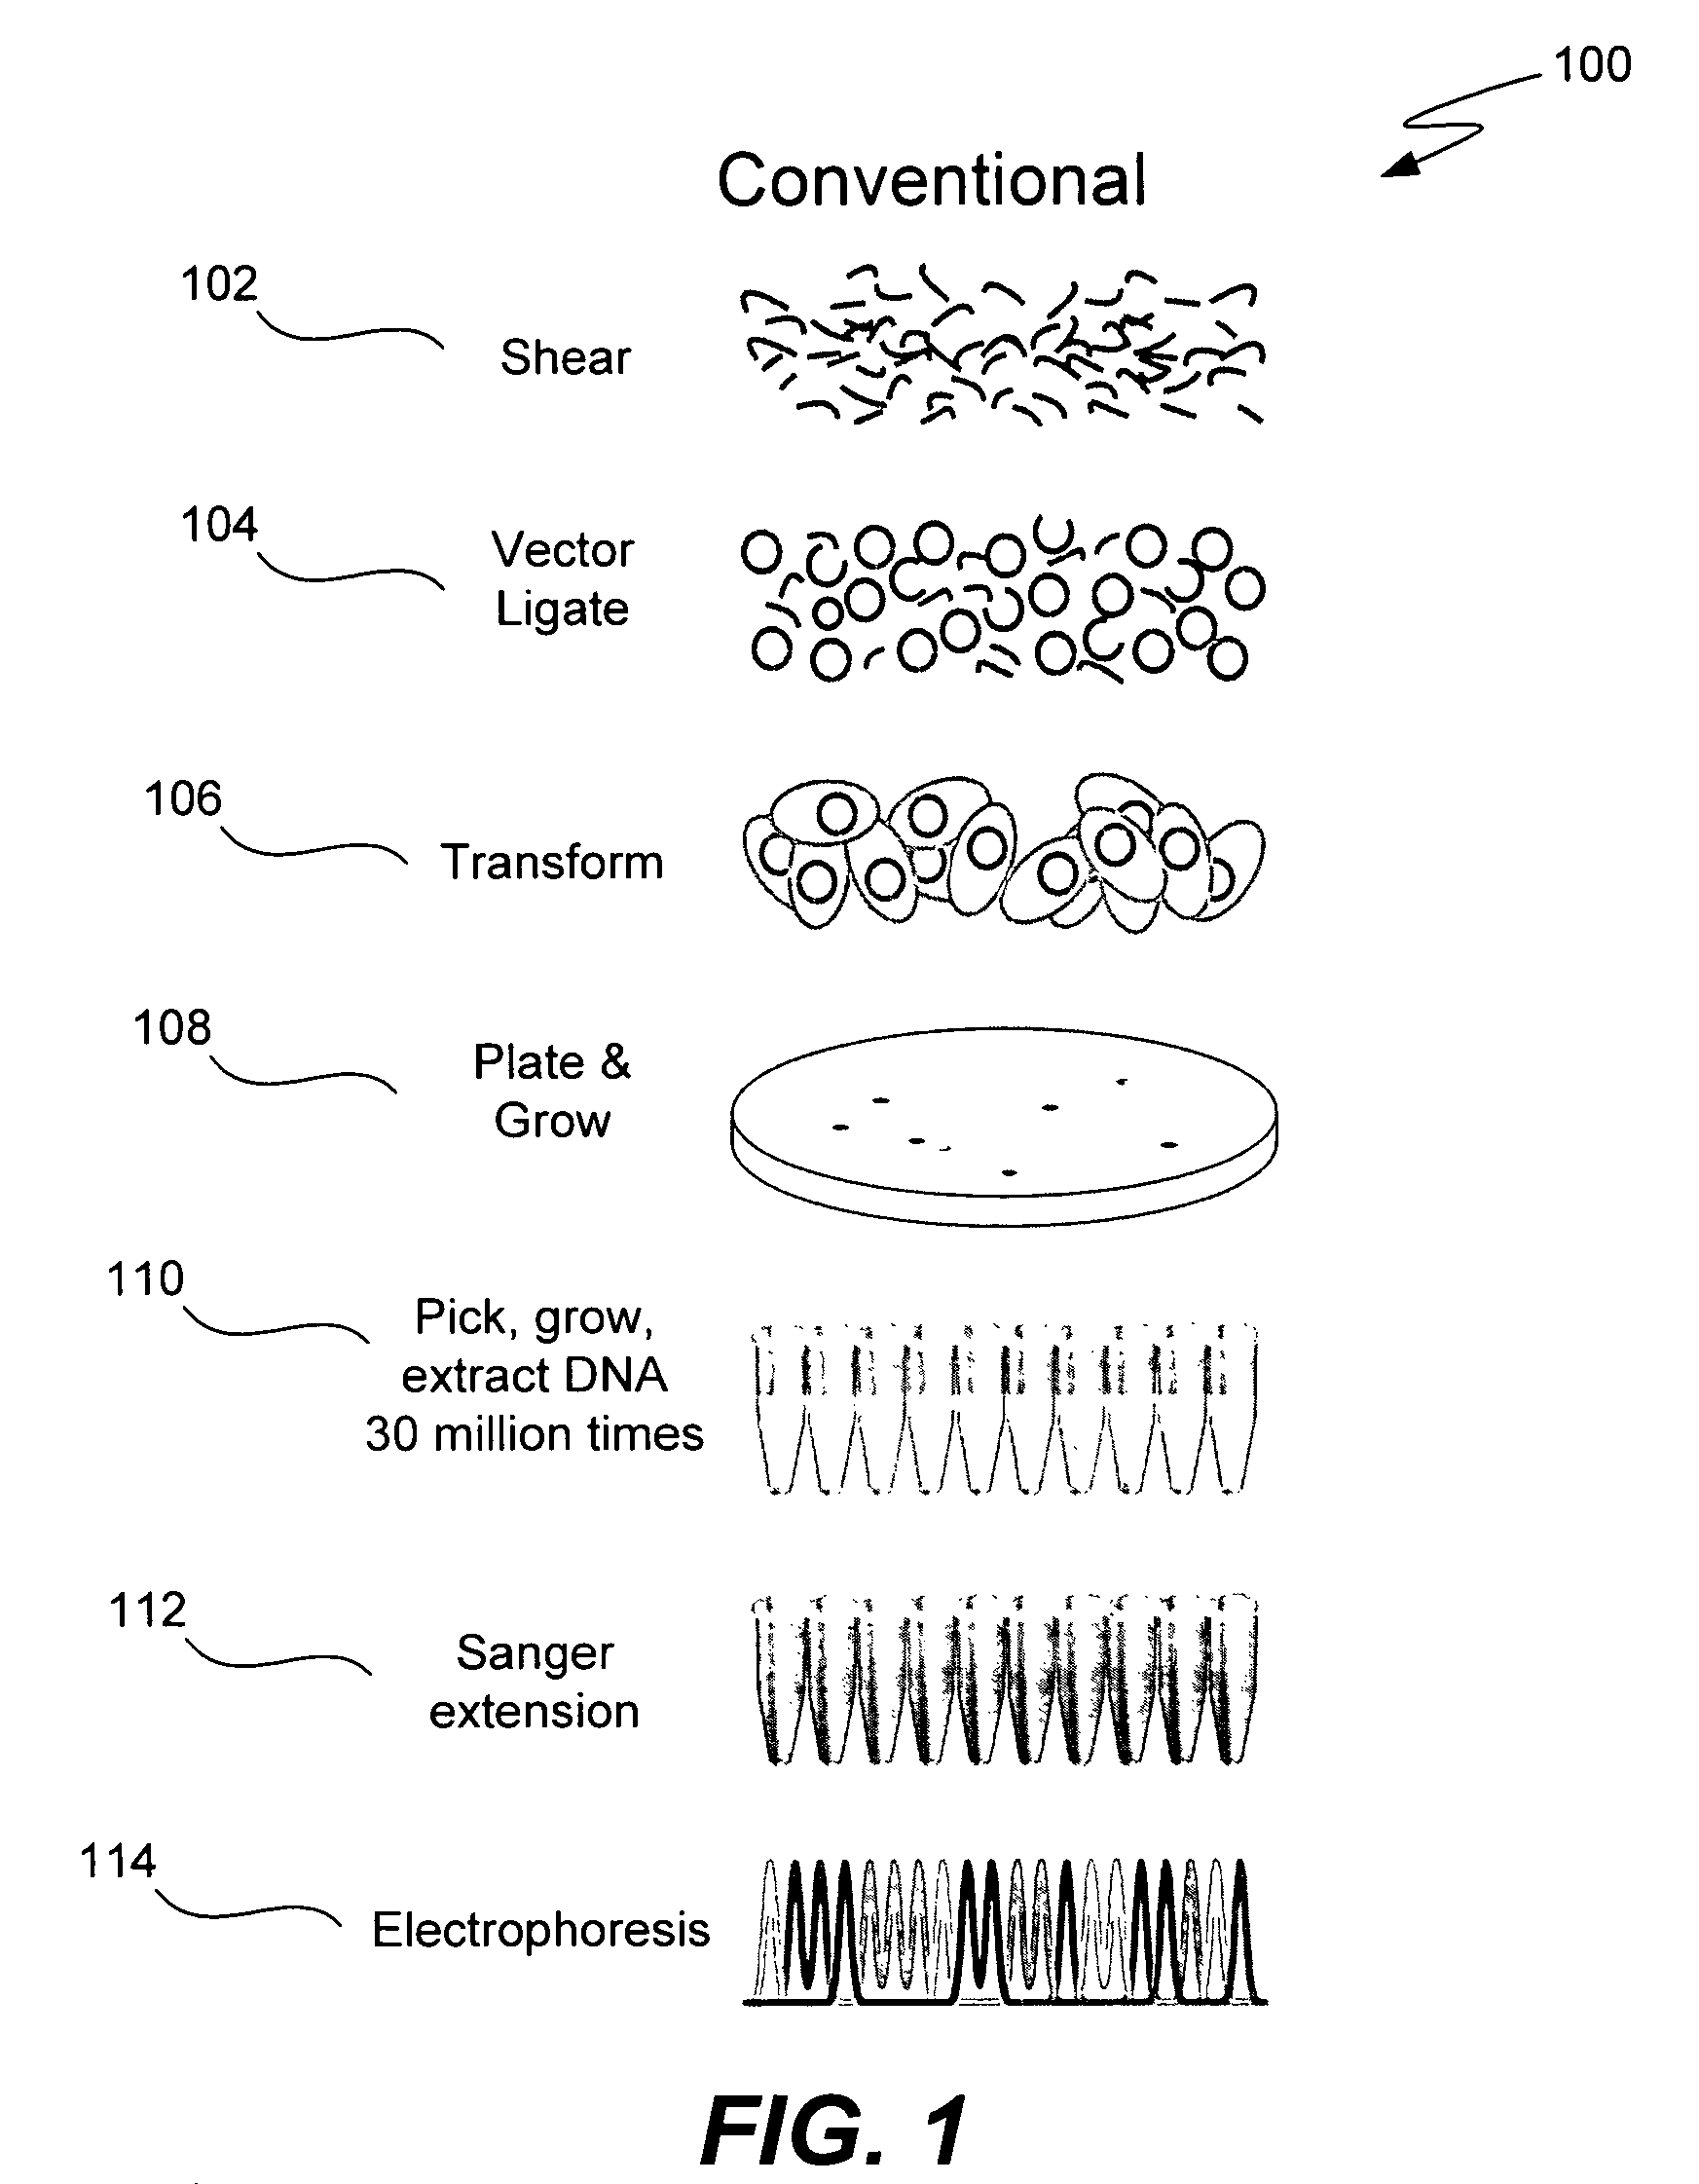 Microfabricated integrated DNA analysis system